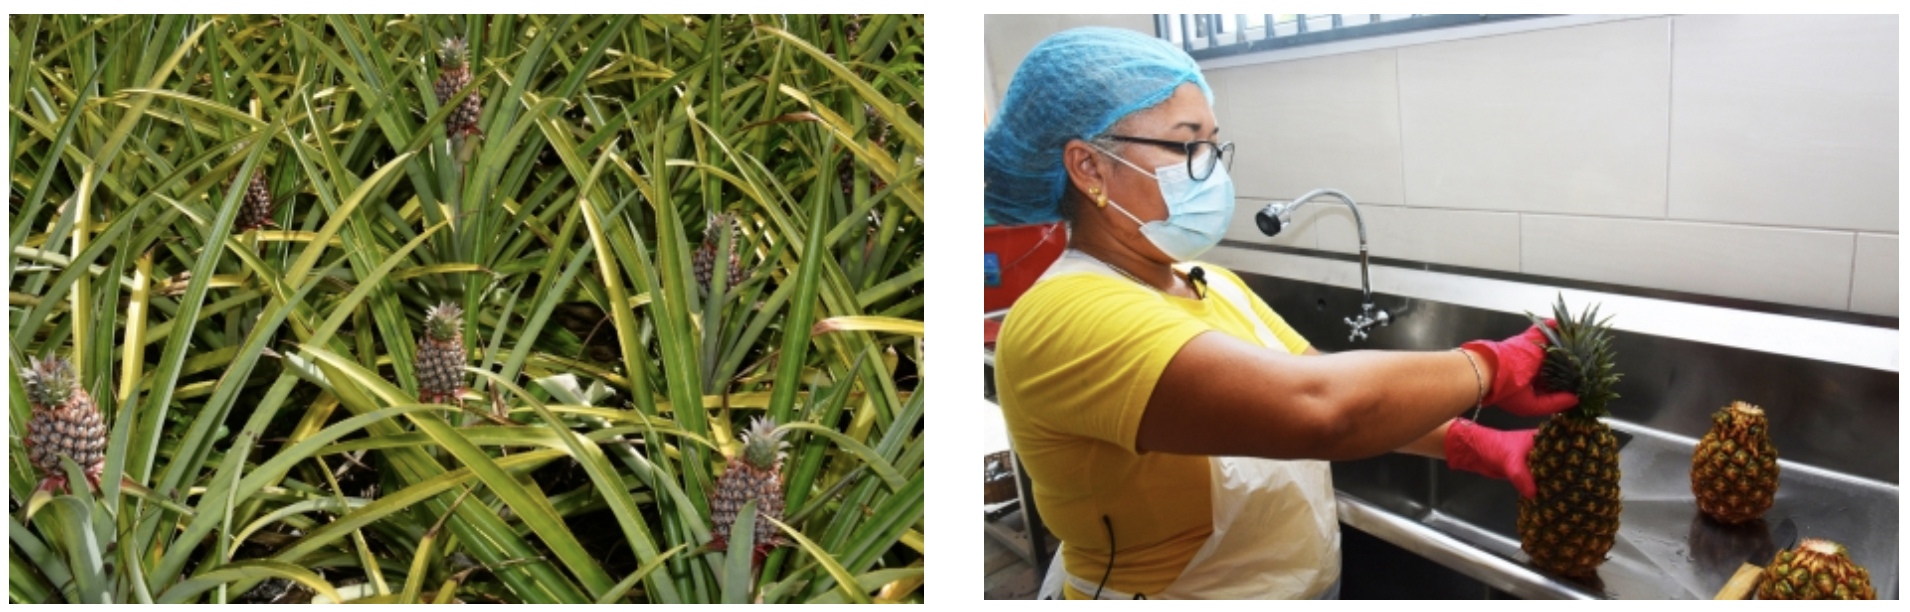 The initiative by FAO and its partners will help multiply by ten the quantity of pineapples produced by 2030 and establish new and modern processing facilities to reach wider markets. ©Intersnap